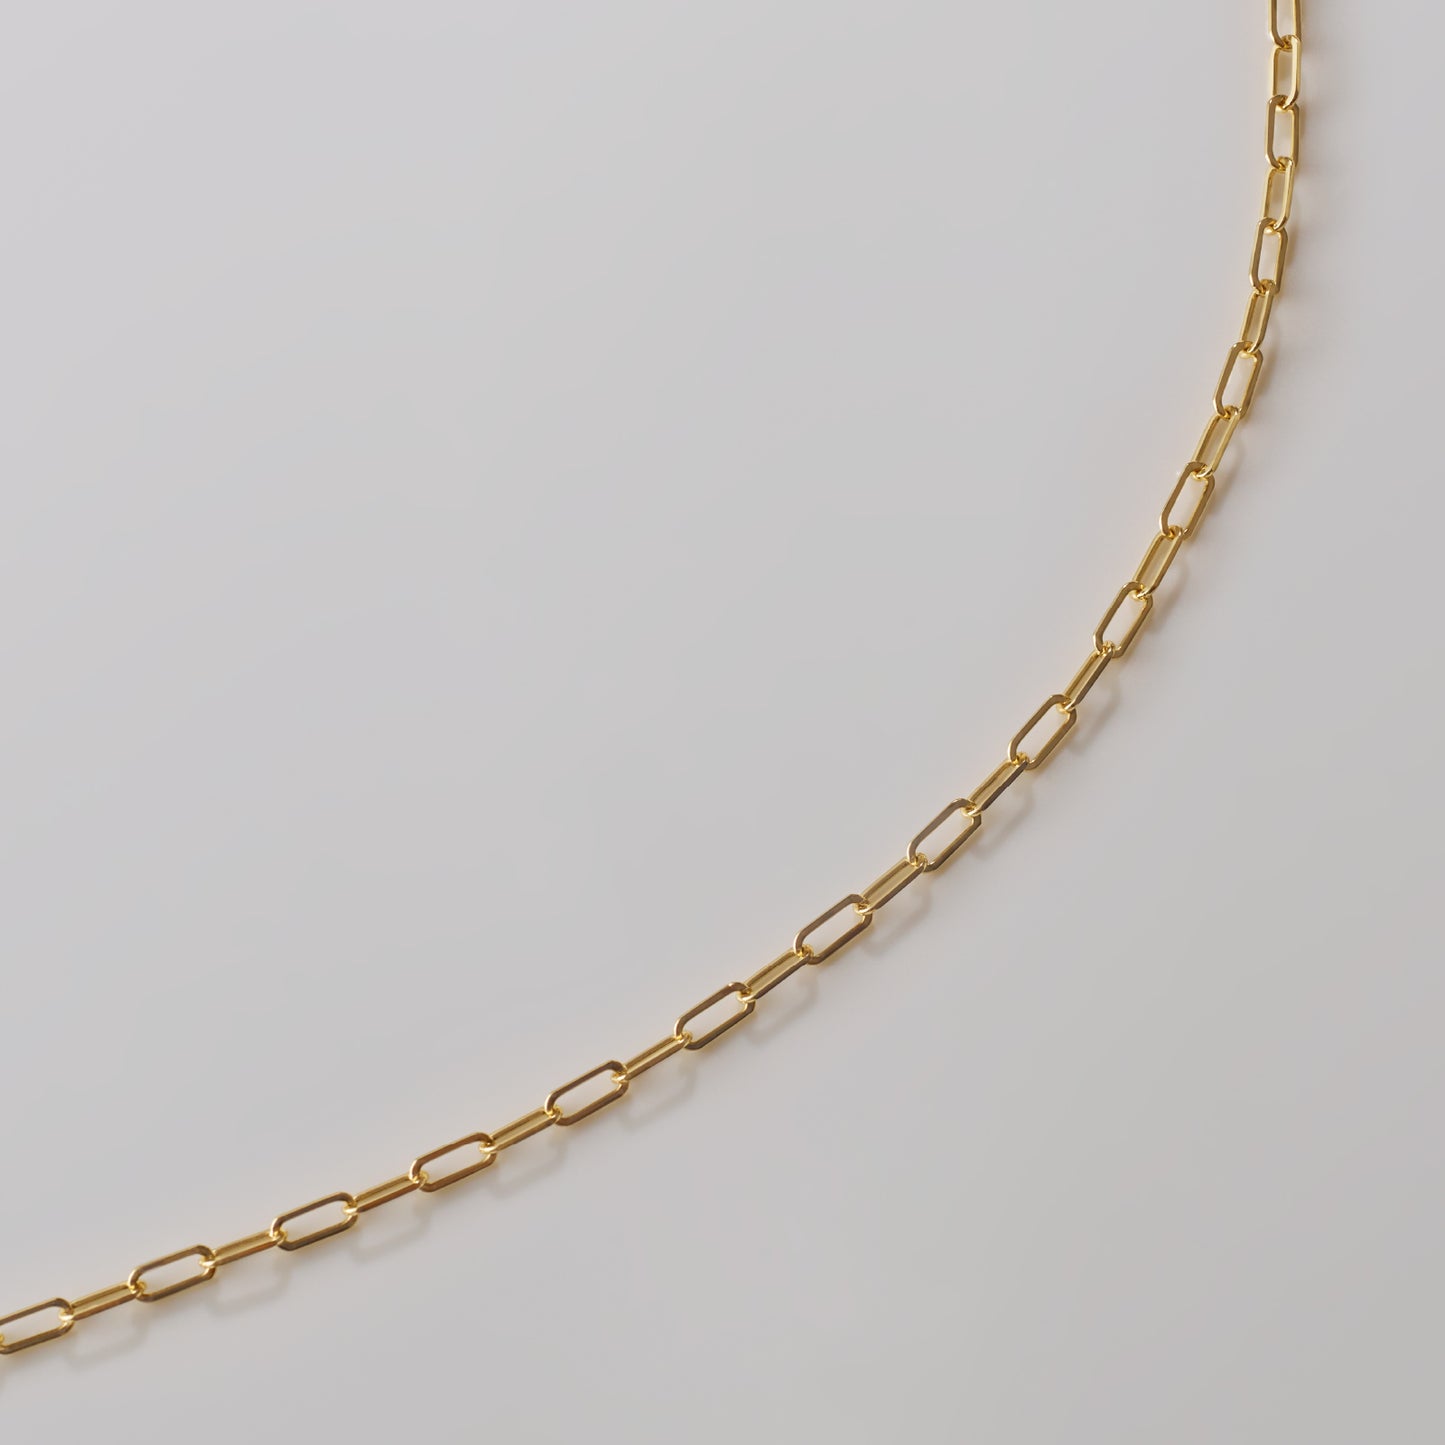 verusマタニティジュエリーセット ゴールド（Babyring Gold × Necklace Gold）